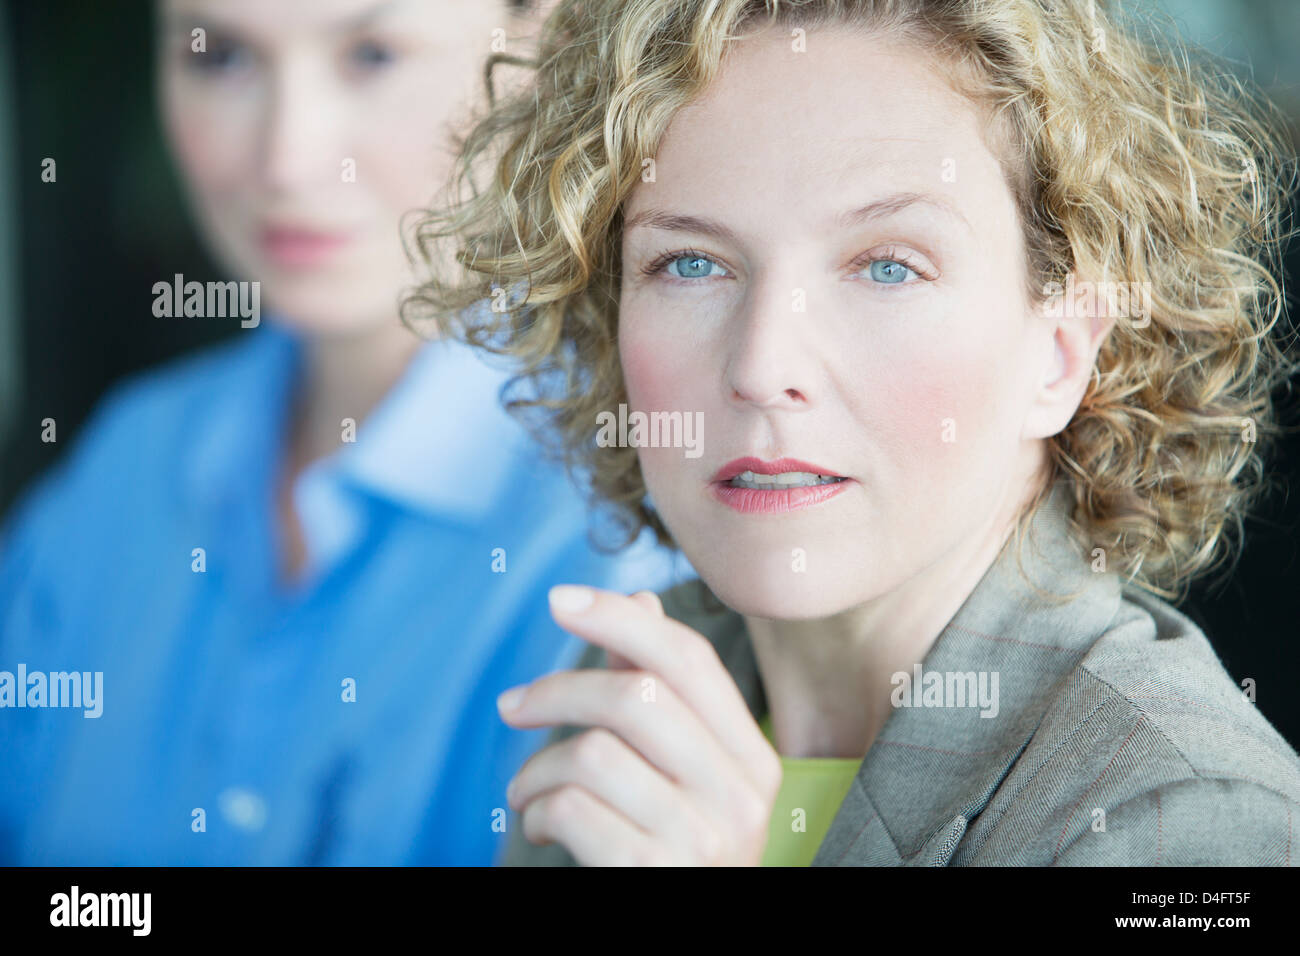 Close up of businesswoman's serious face Stock Photo